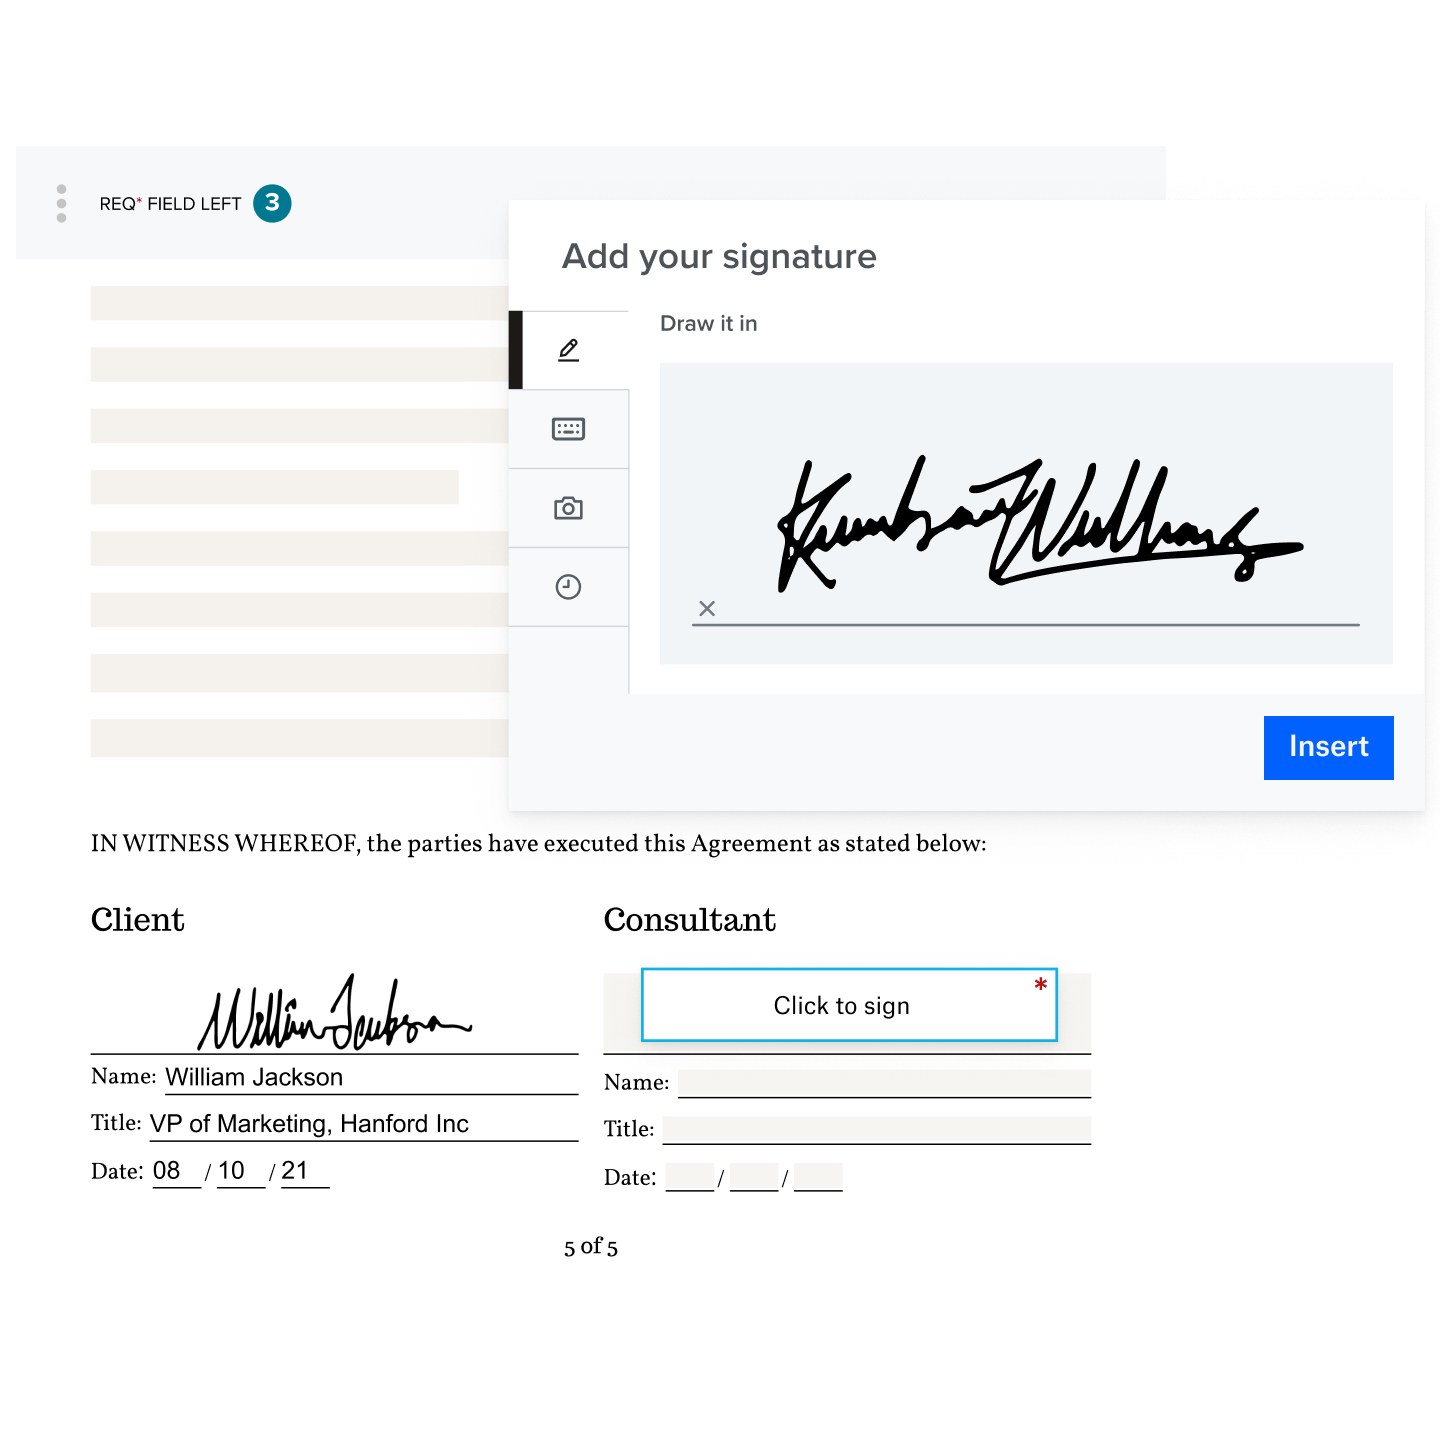 The HelloSign signer experience showing a document with signature fields ready to be completed and a modal with a signature being created.